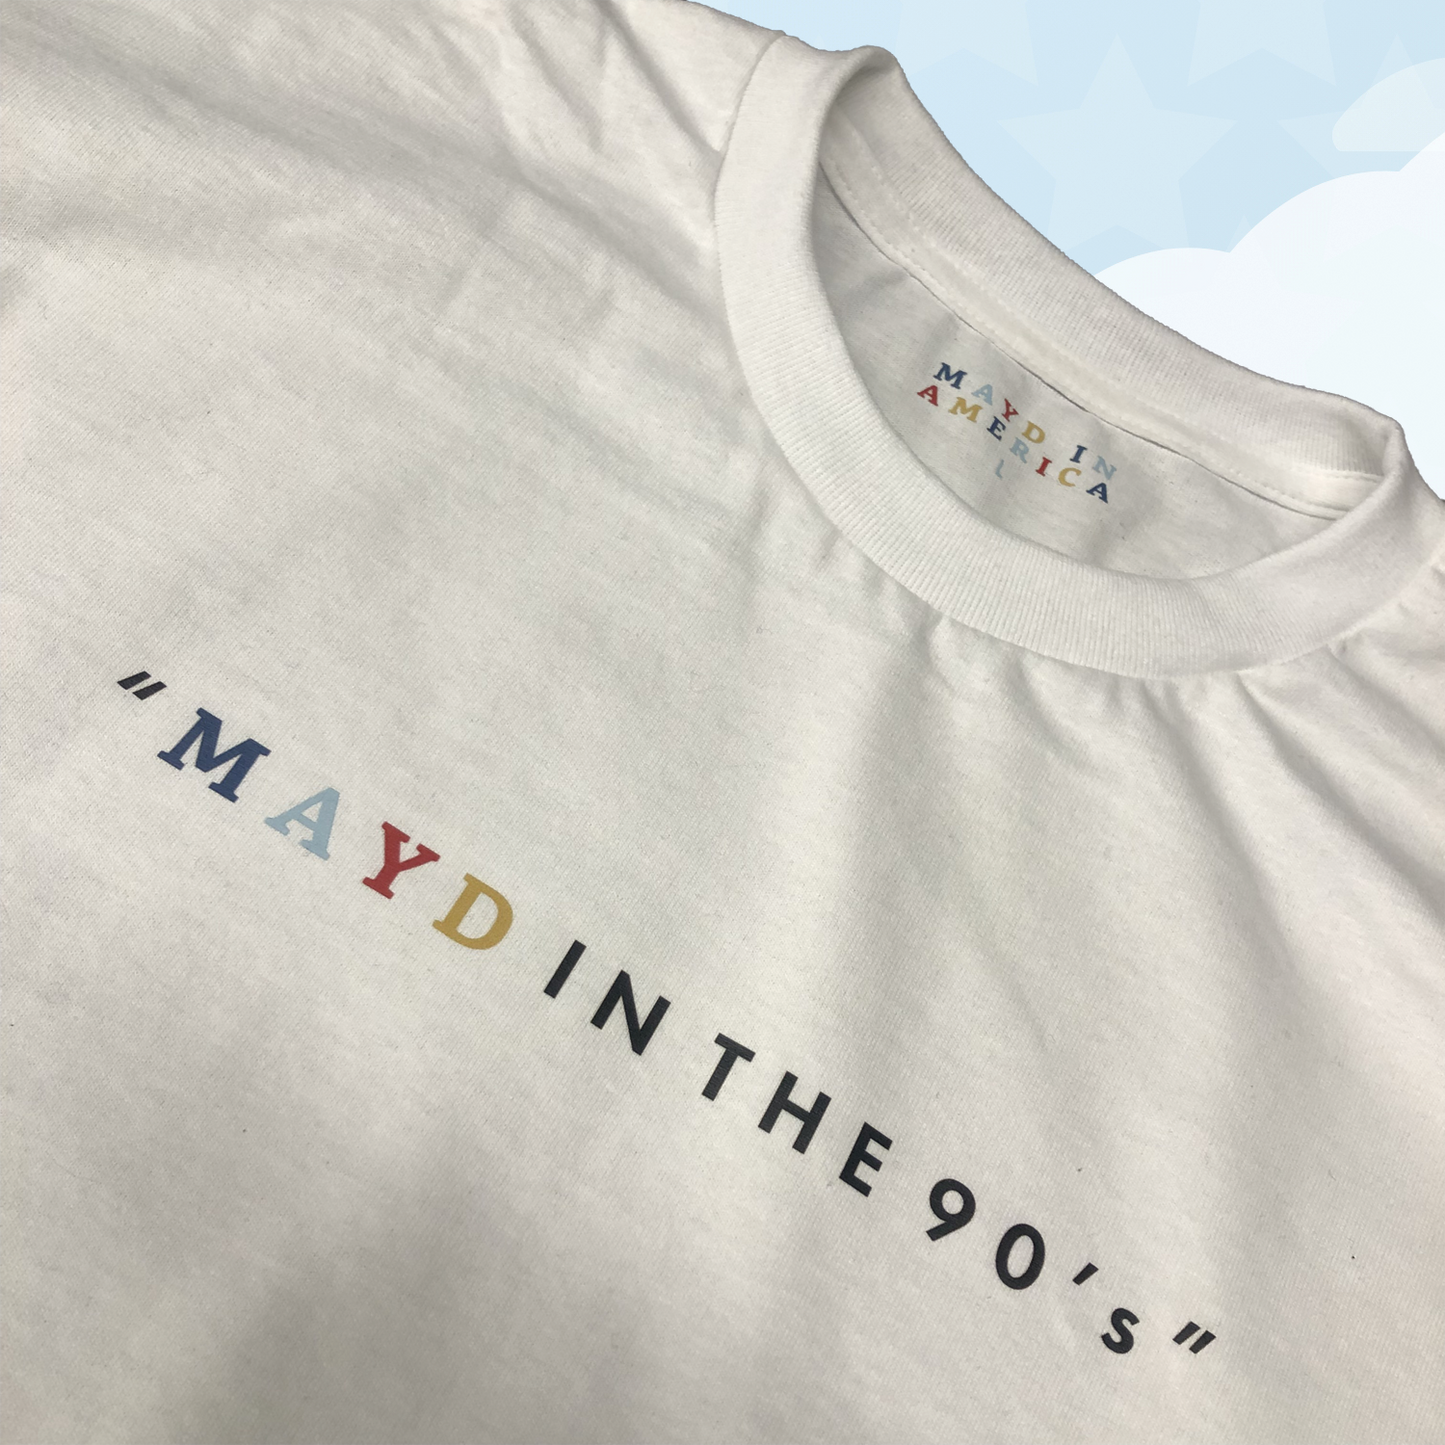 MAYD in America "Mayd in the 90s" T-shirt